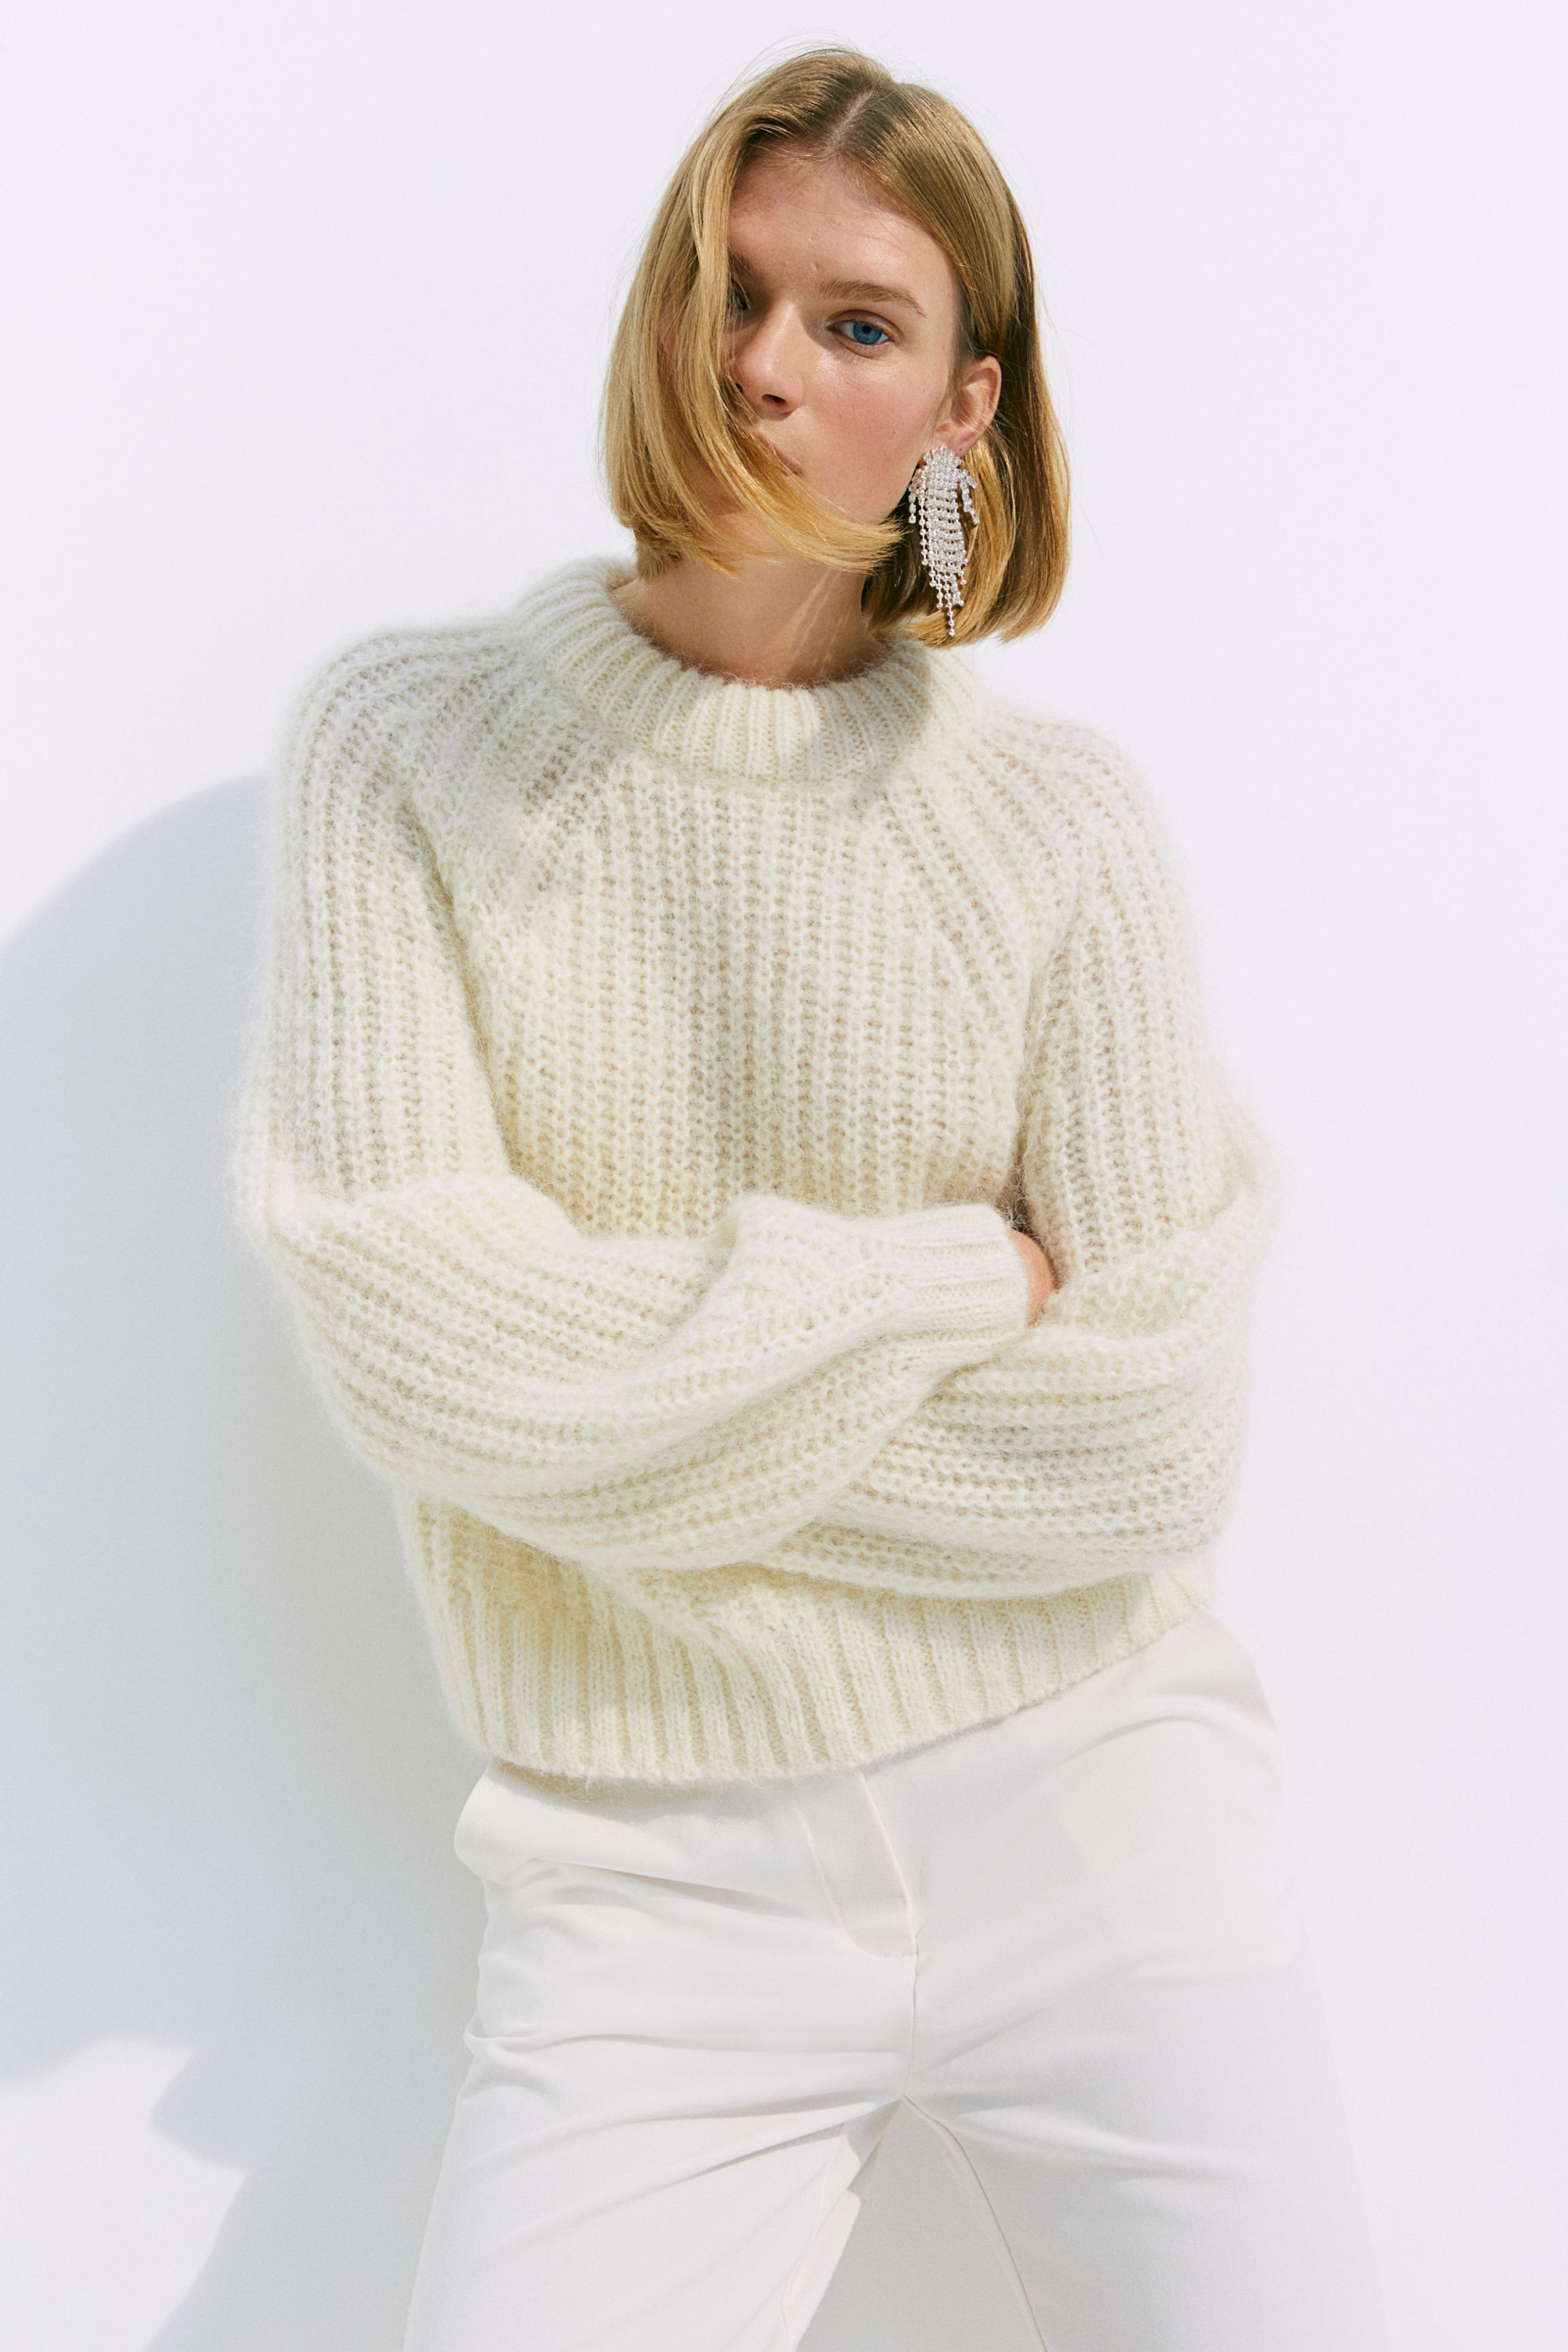 Cable Knit Sweater Cozy Wool Sweater Knitted Ivory Pullover Unique Knitwear Women's Ivory Sweater V Neck Jumper Open Back Sweater